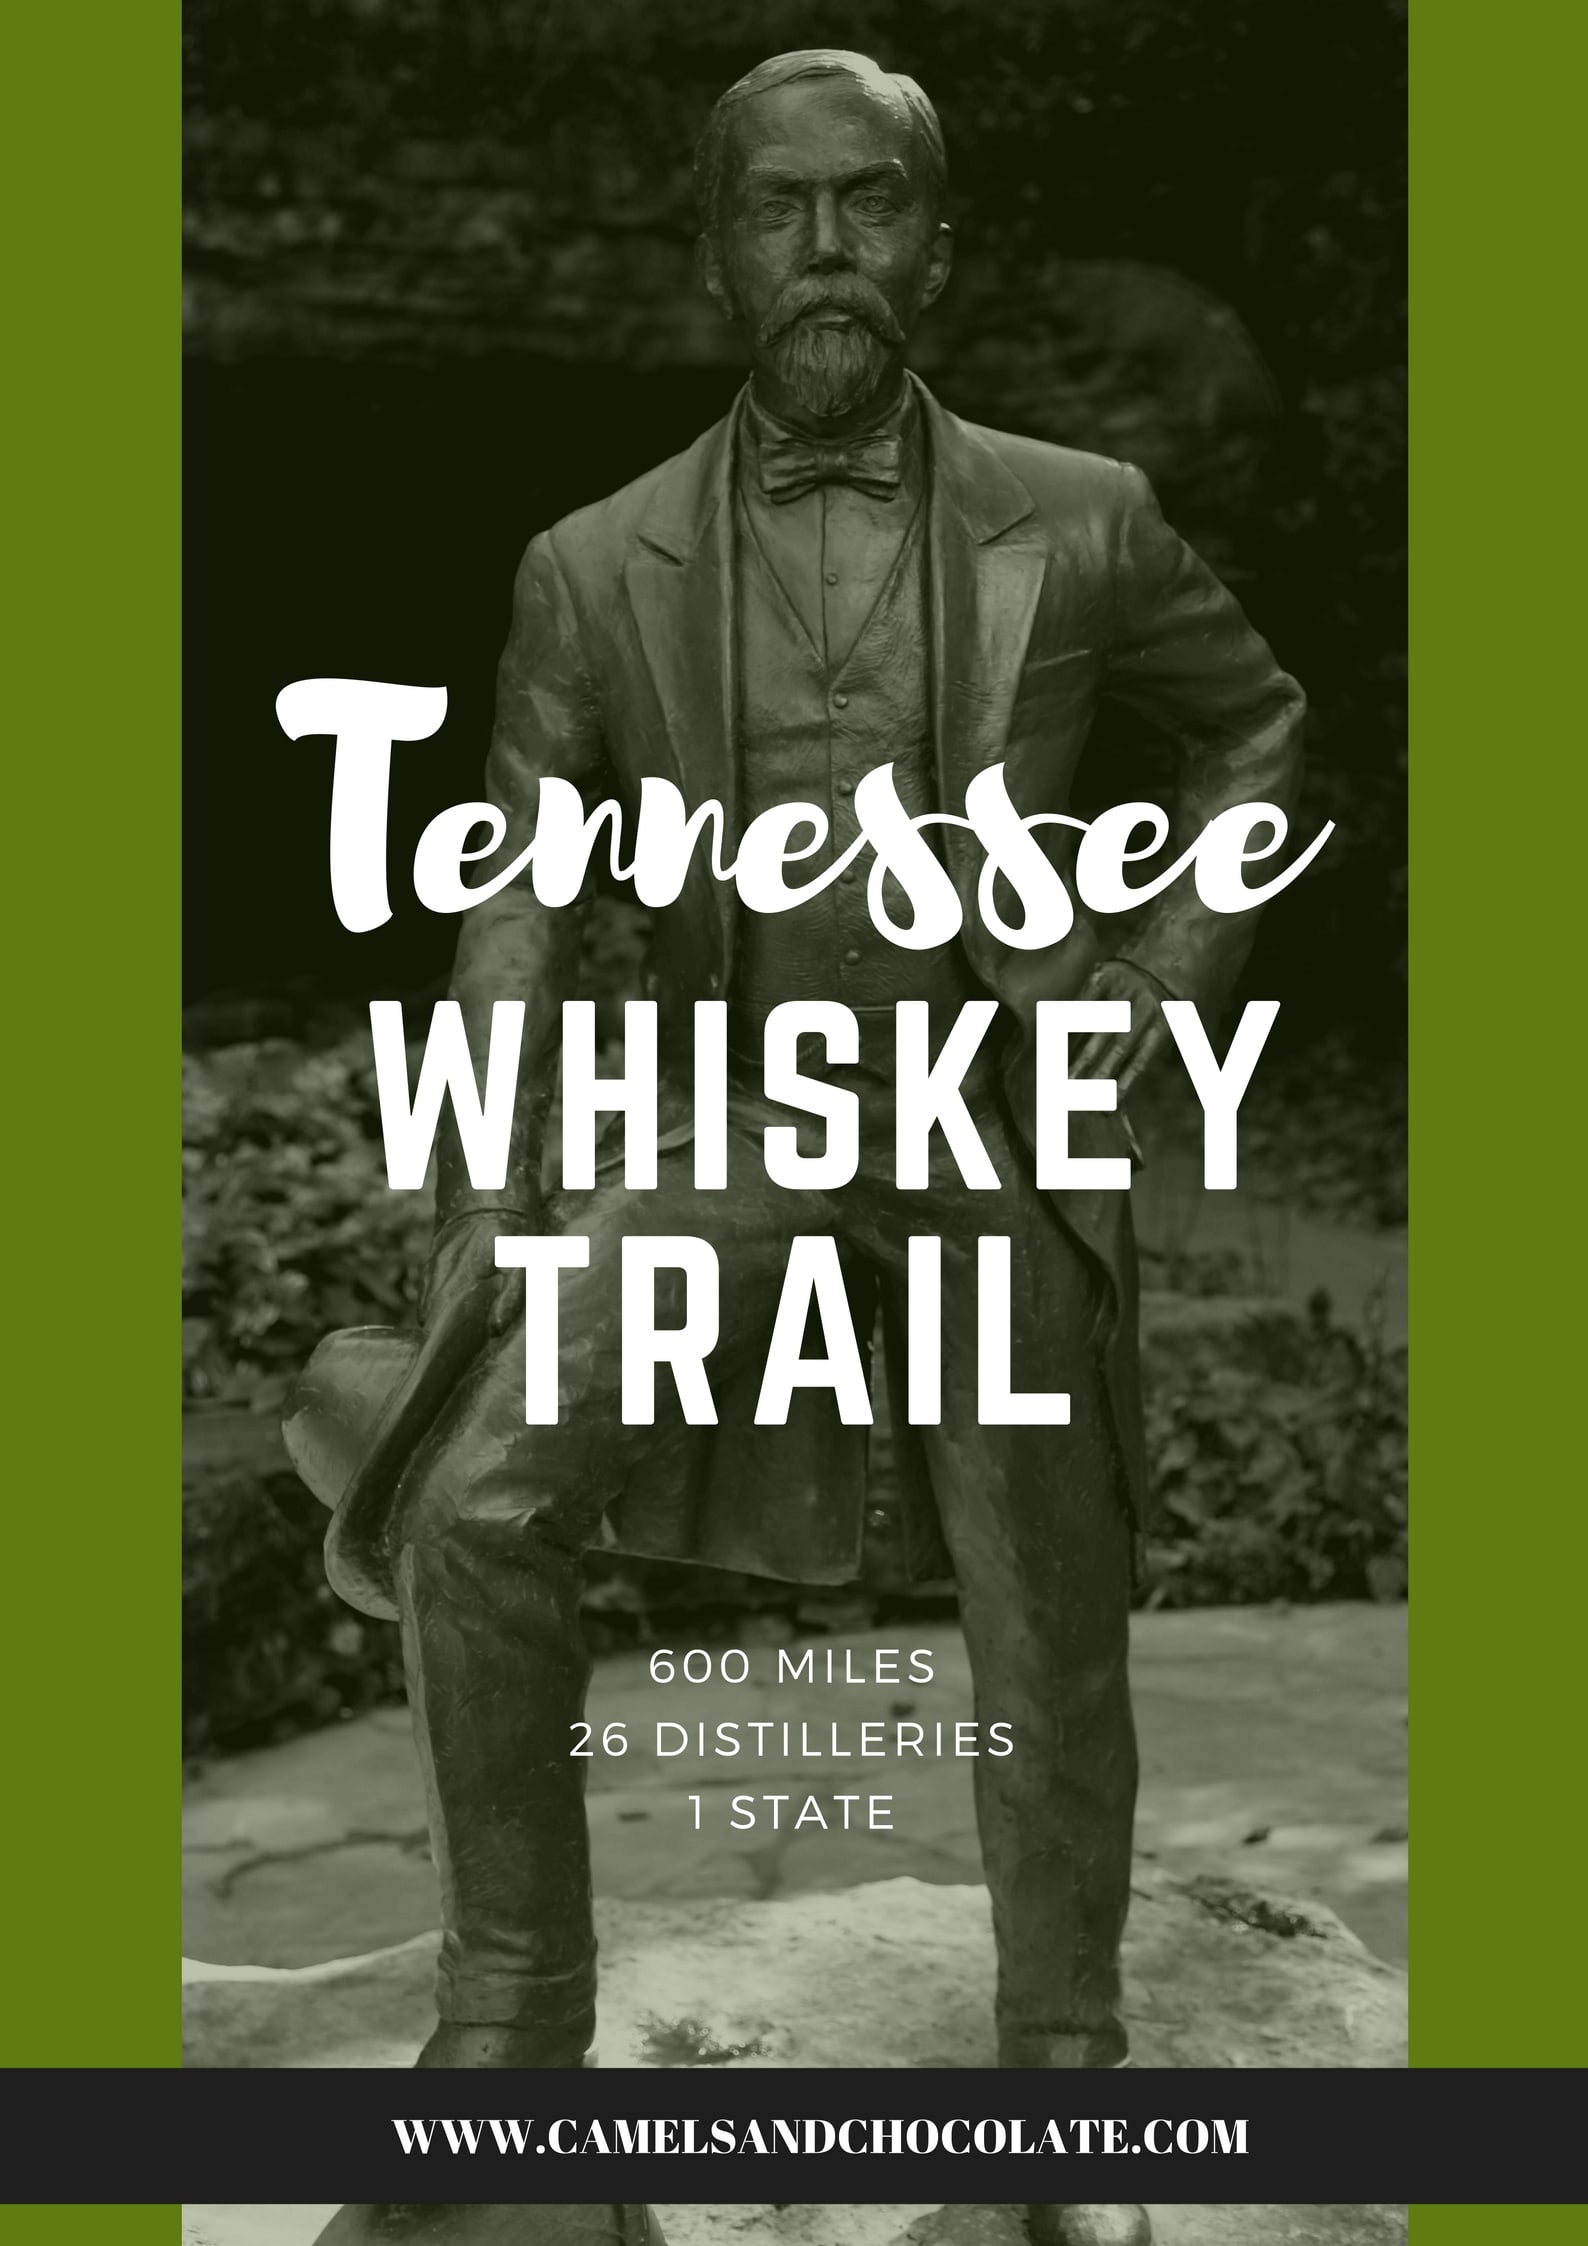 Tennessee Whiskey Trail: Middle Tennessee Backroads